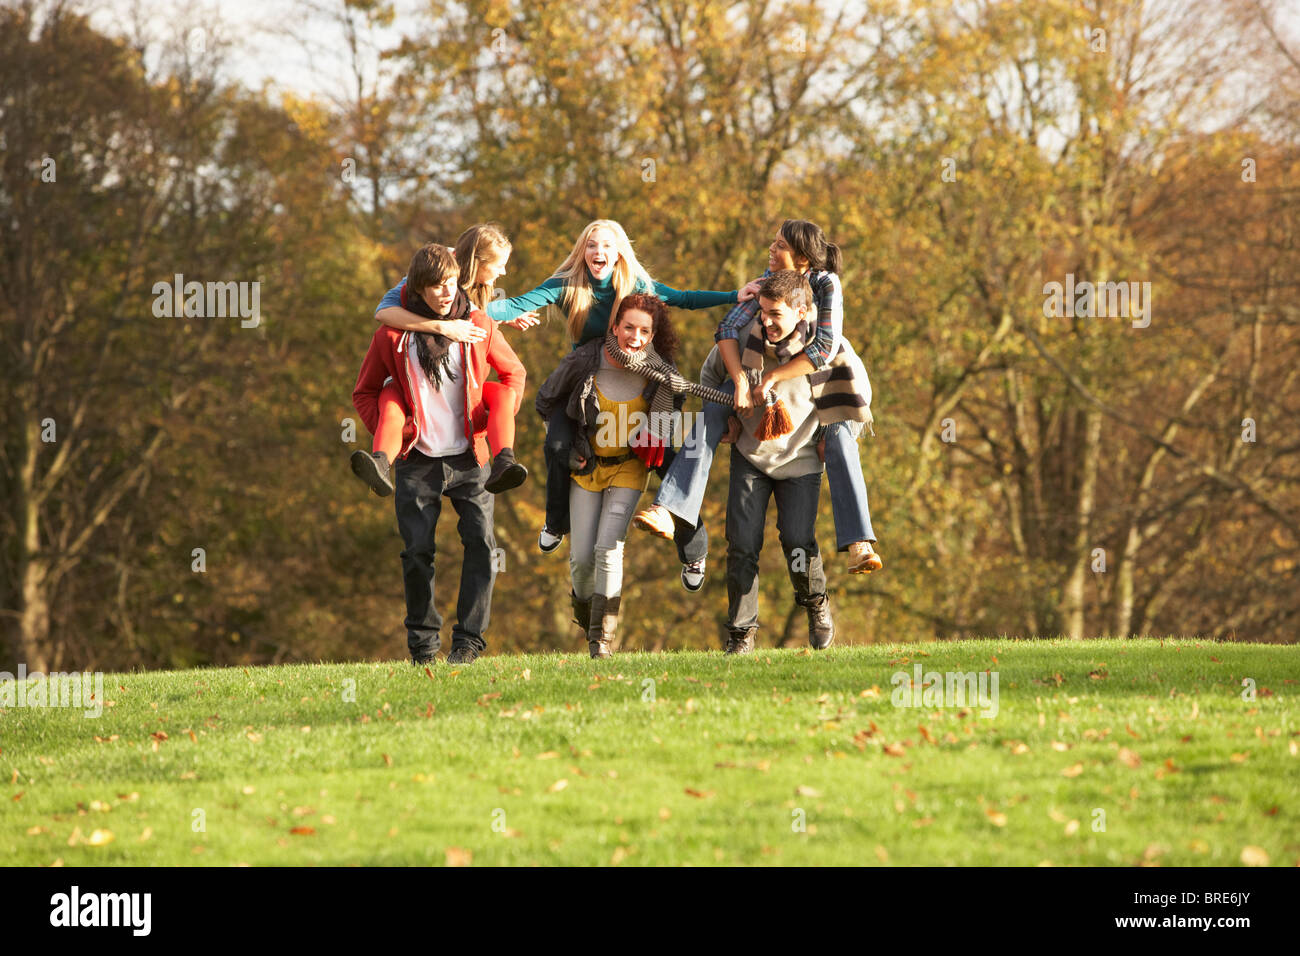 Group Of Teenage Friends Having Piggyback Rides In Autumn Landscape Stock Photo